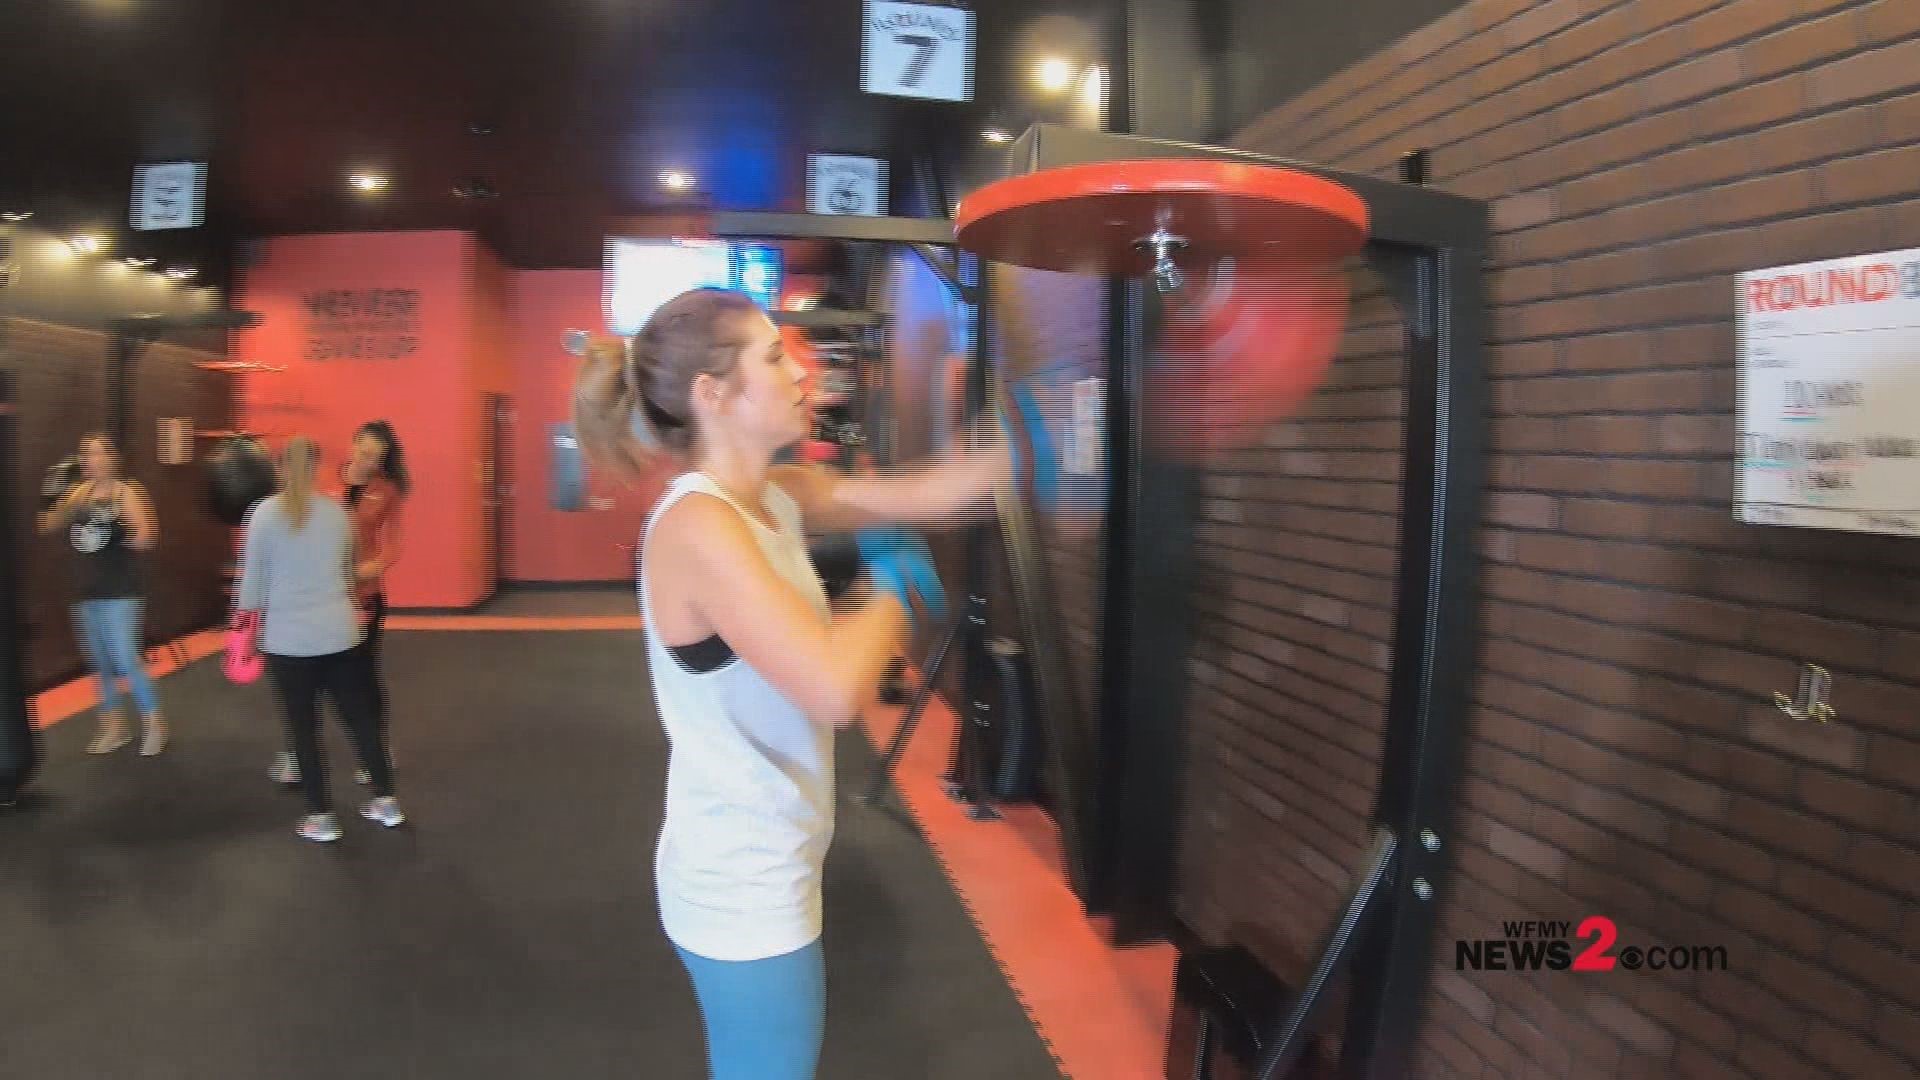 WFMY News 2 takes a look at why people are flocking to boutique fitness studios.